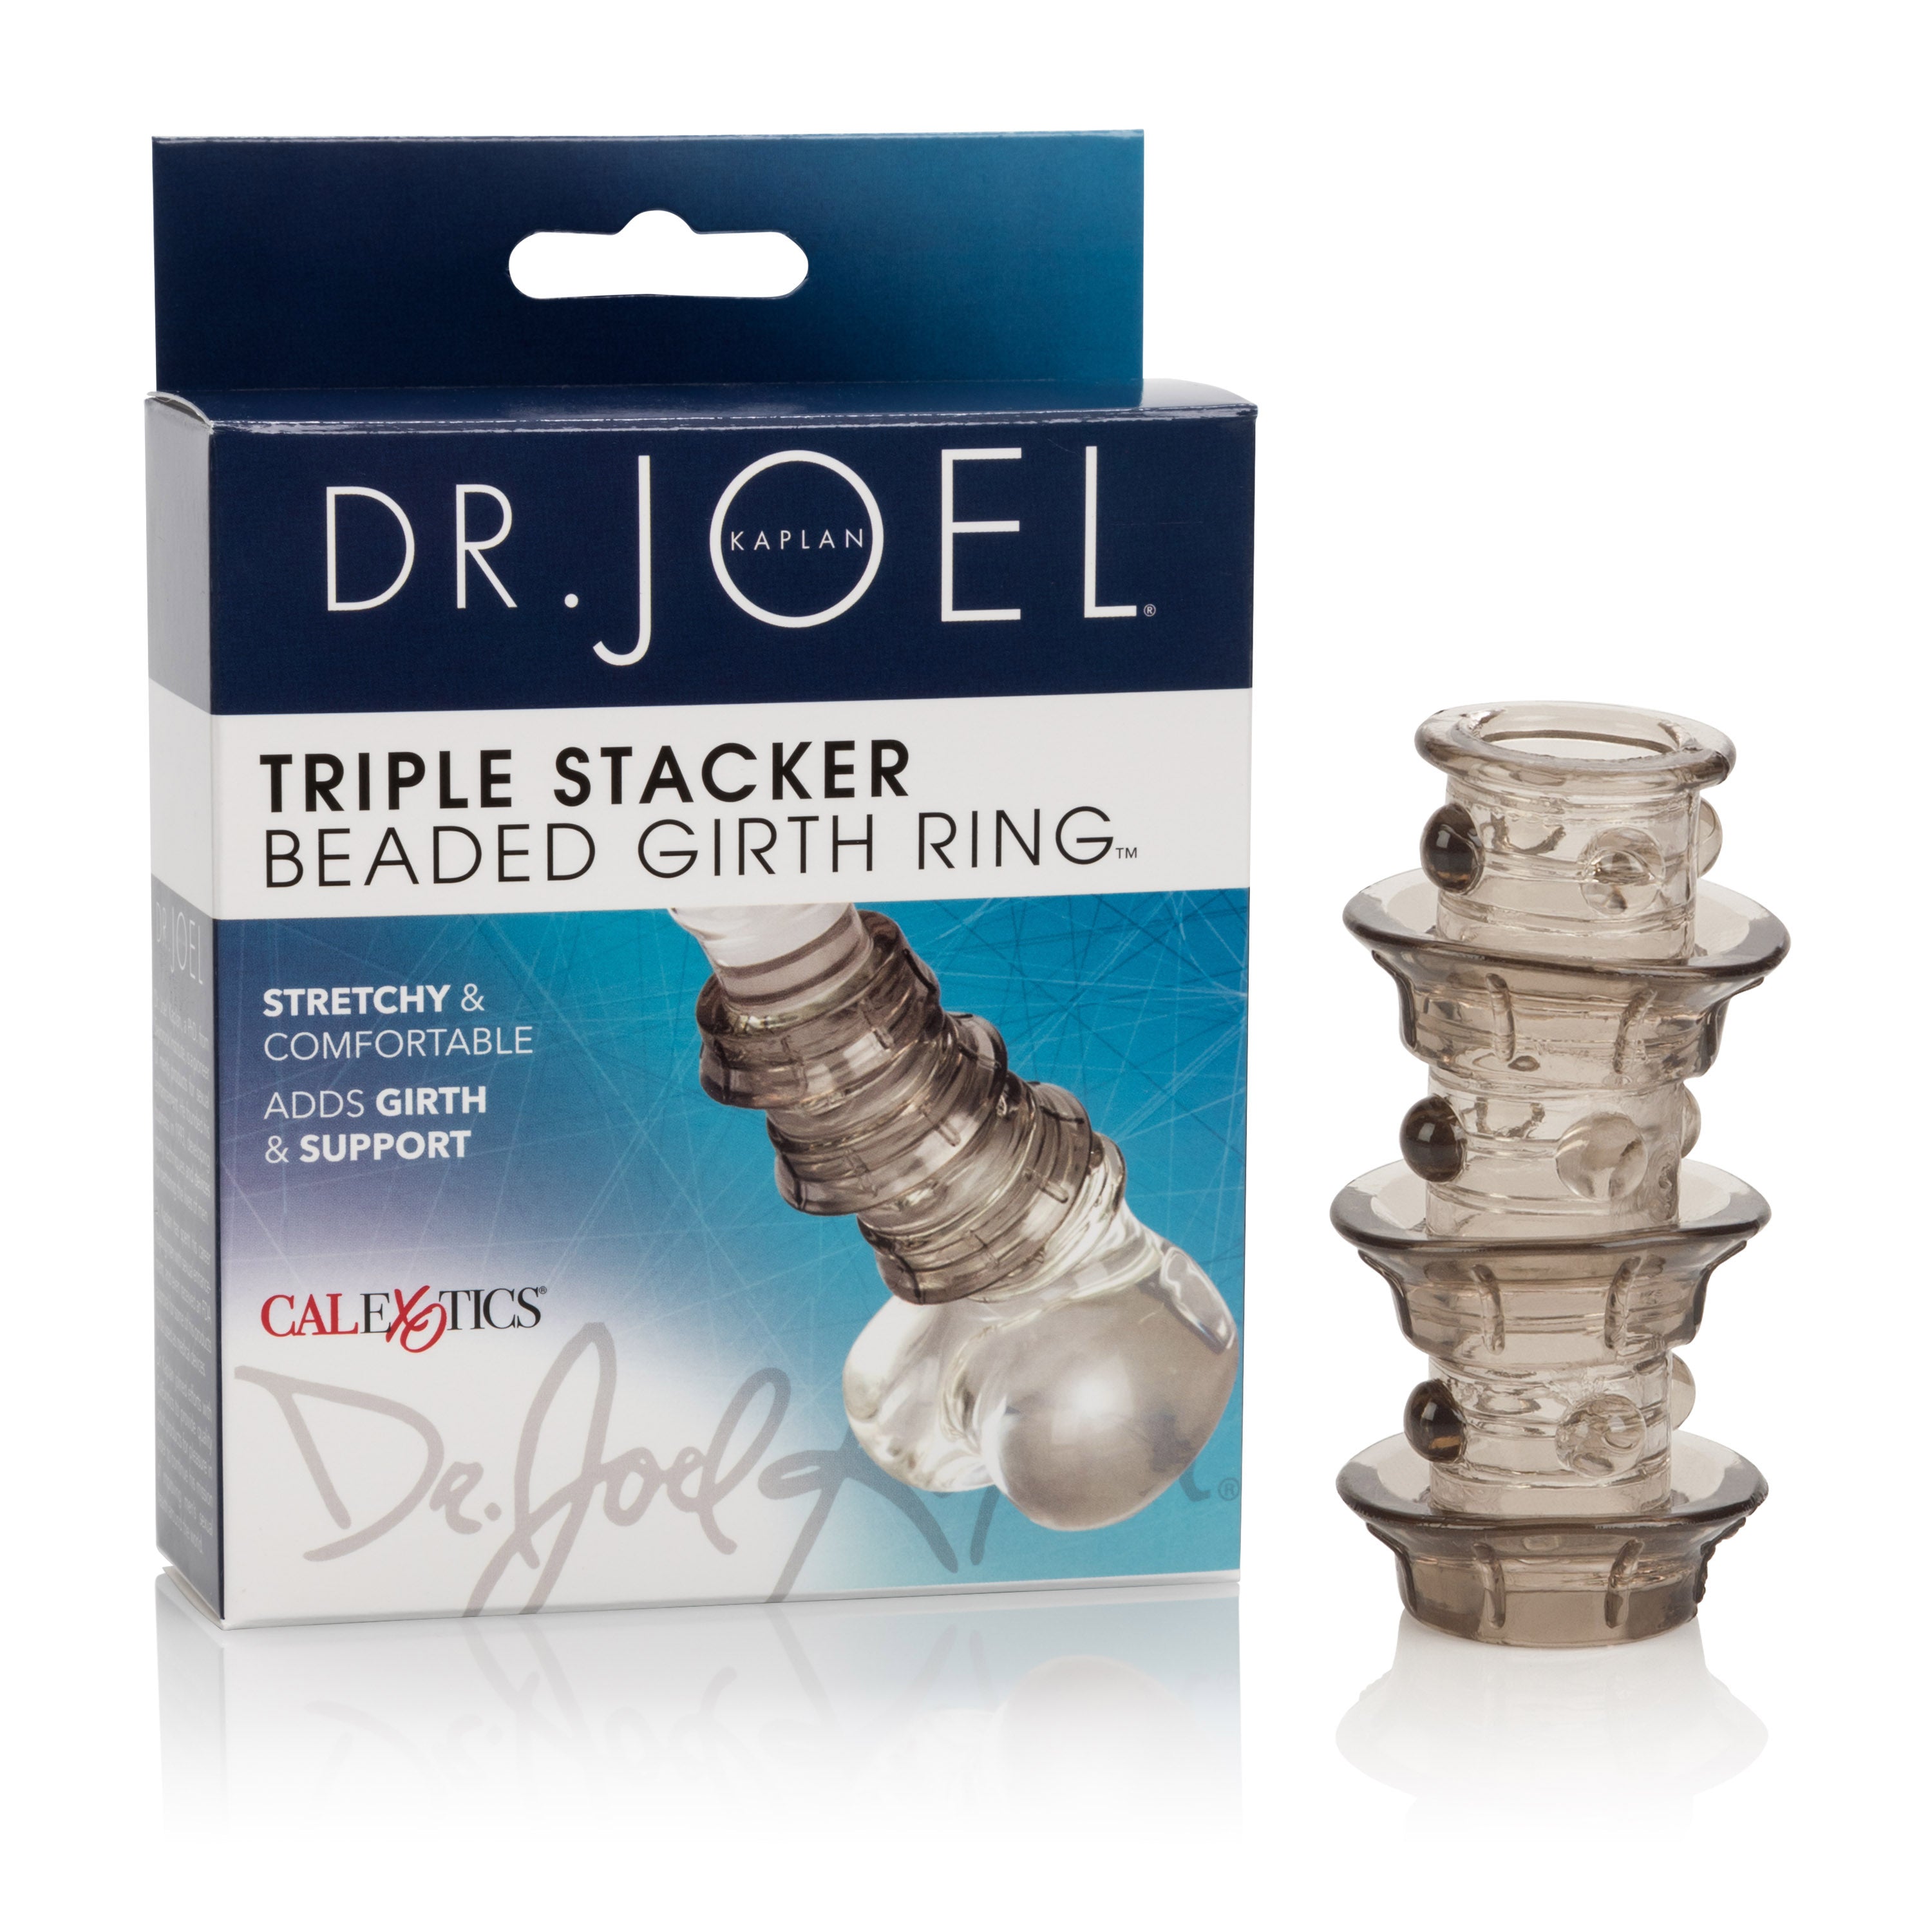 Dr. Joel Kaplan Triple Stacker: Comfortable Beaded Girth Ring with Easy Cleaning